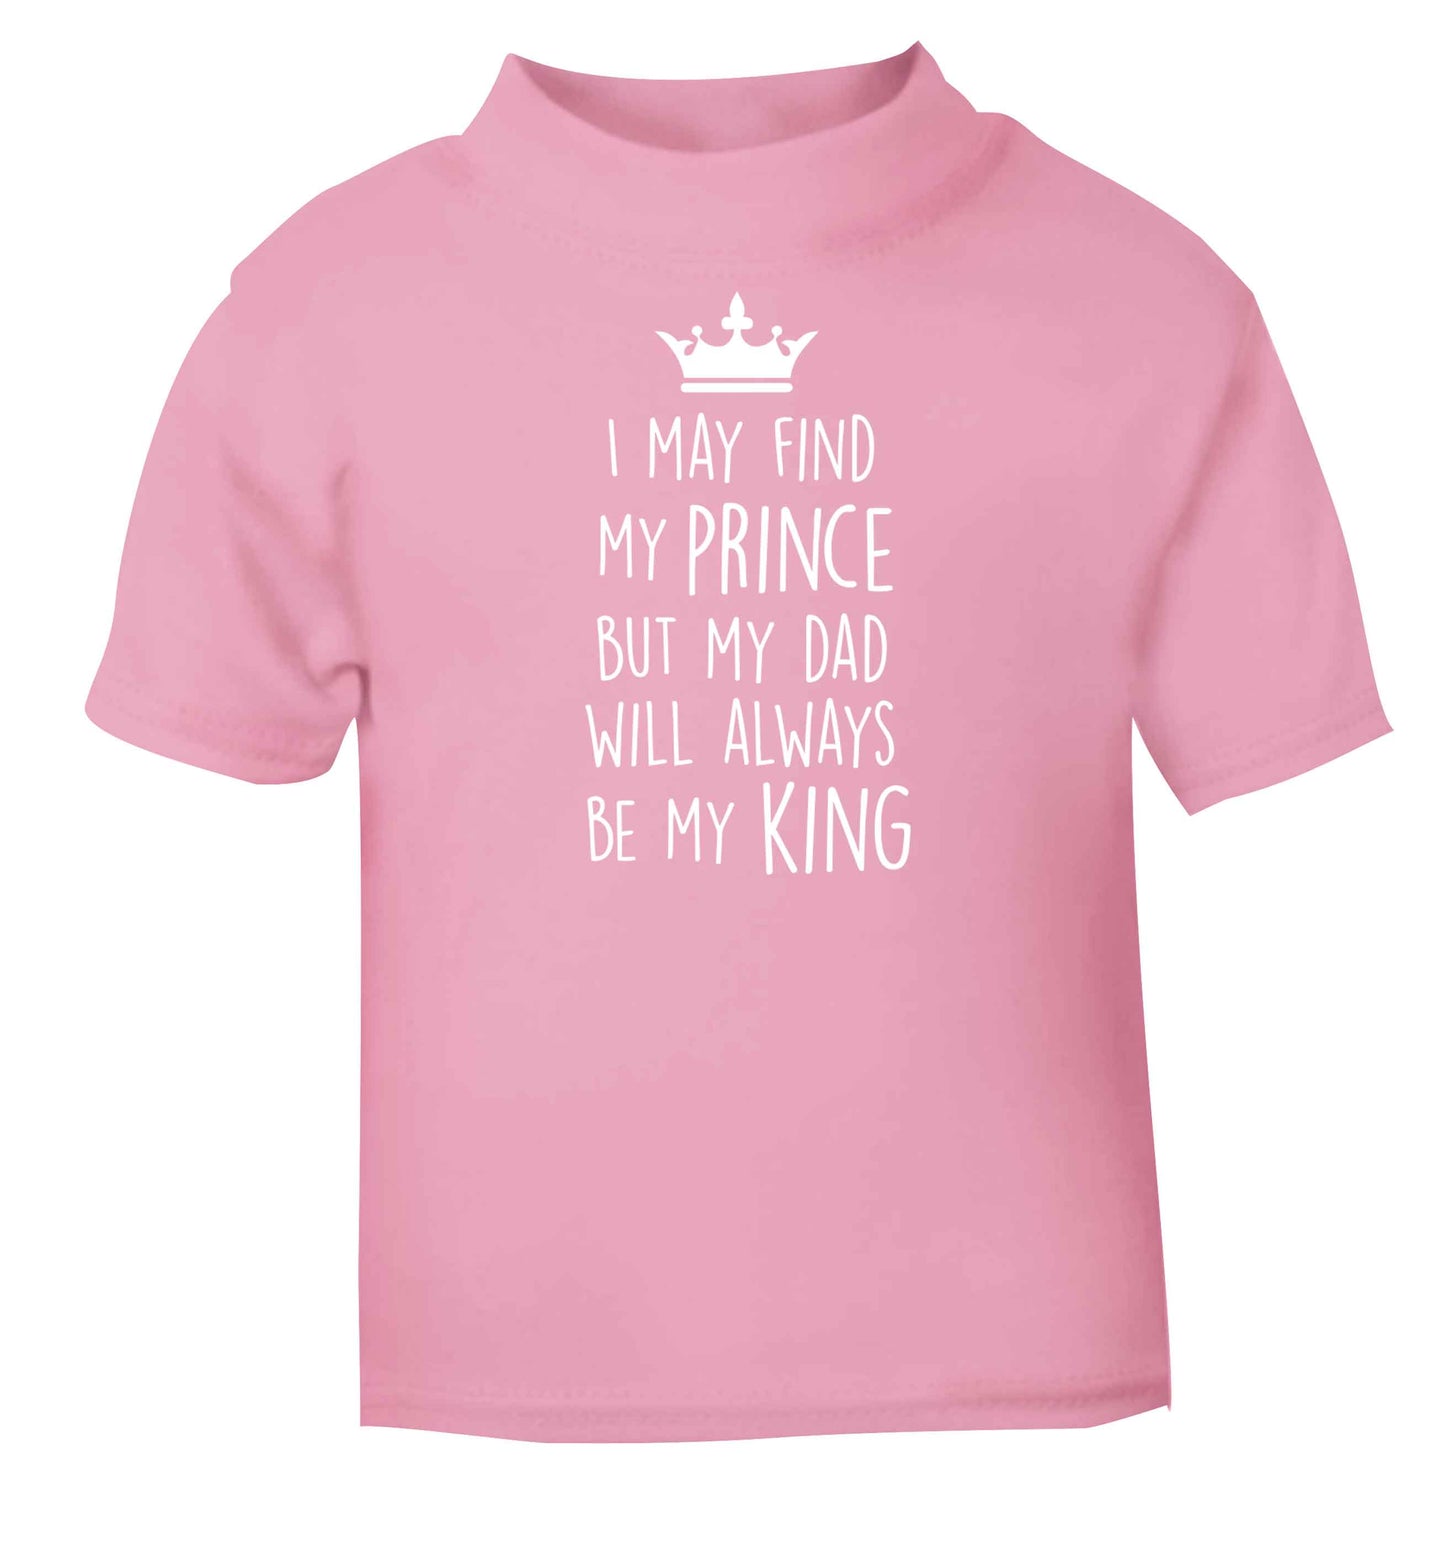 I may find my prince but my dad will always be my king light pink baby toddler Tshirt 2 Years